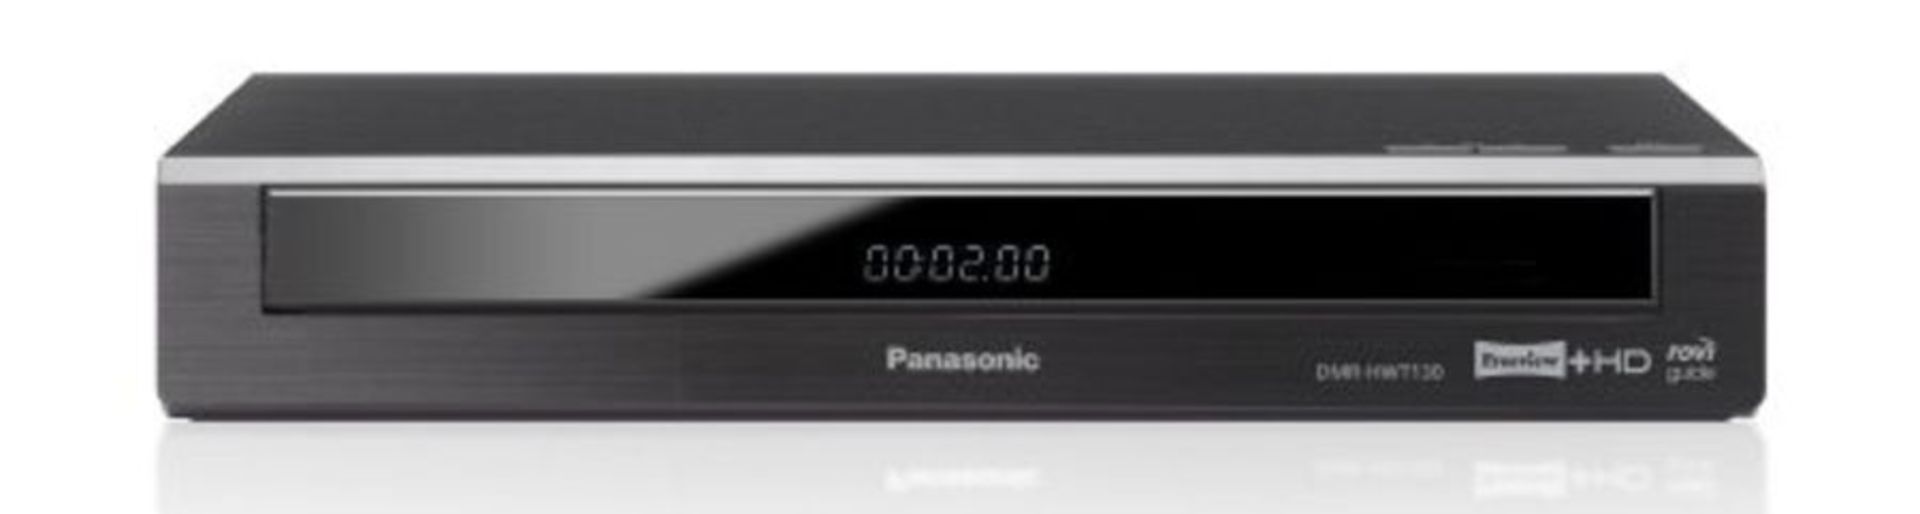 RRP £169.00 Panasonic DMR-HWT130EB Freeview+ HD Hard Disk Recorder with Twin HD Terrestrial Tuner,